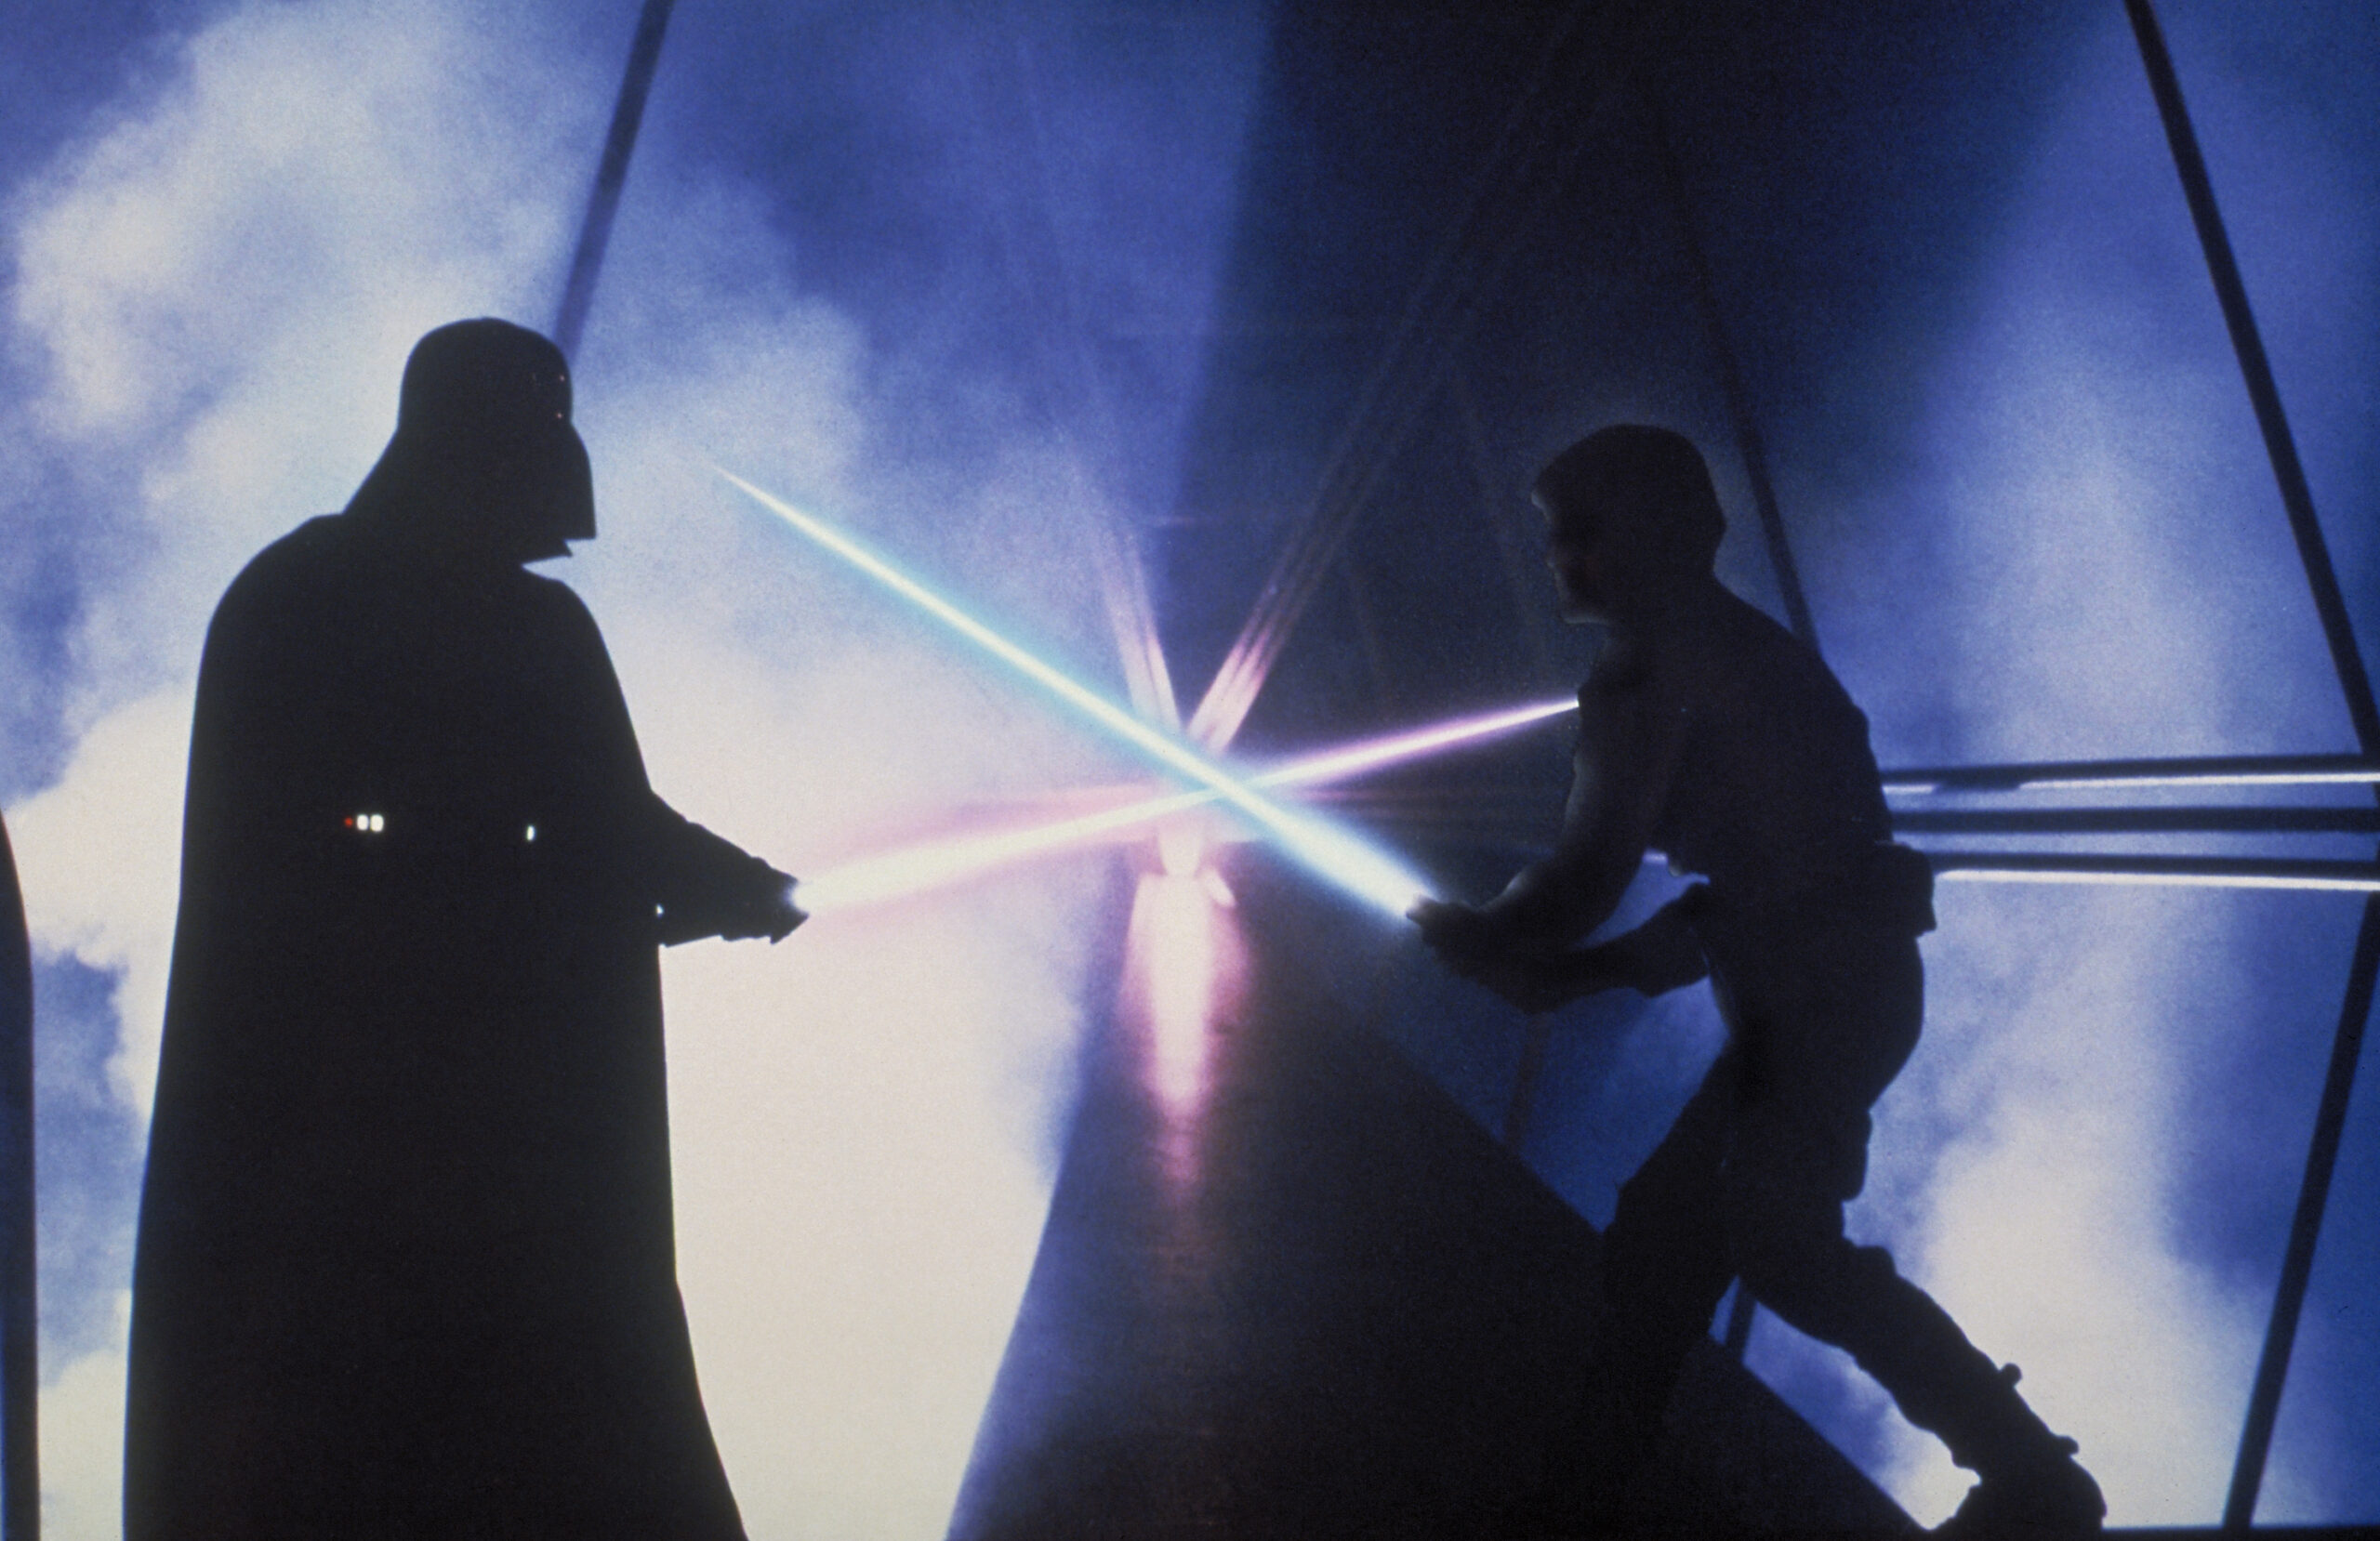 The enduring legacy of Star Wars keeps consumers buying again and again